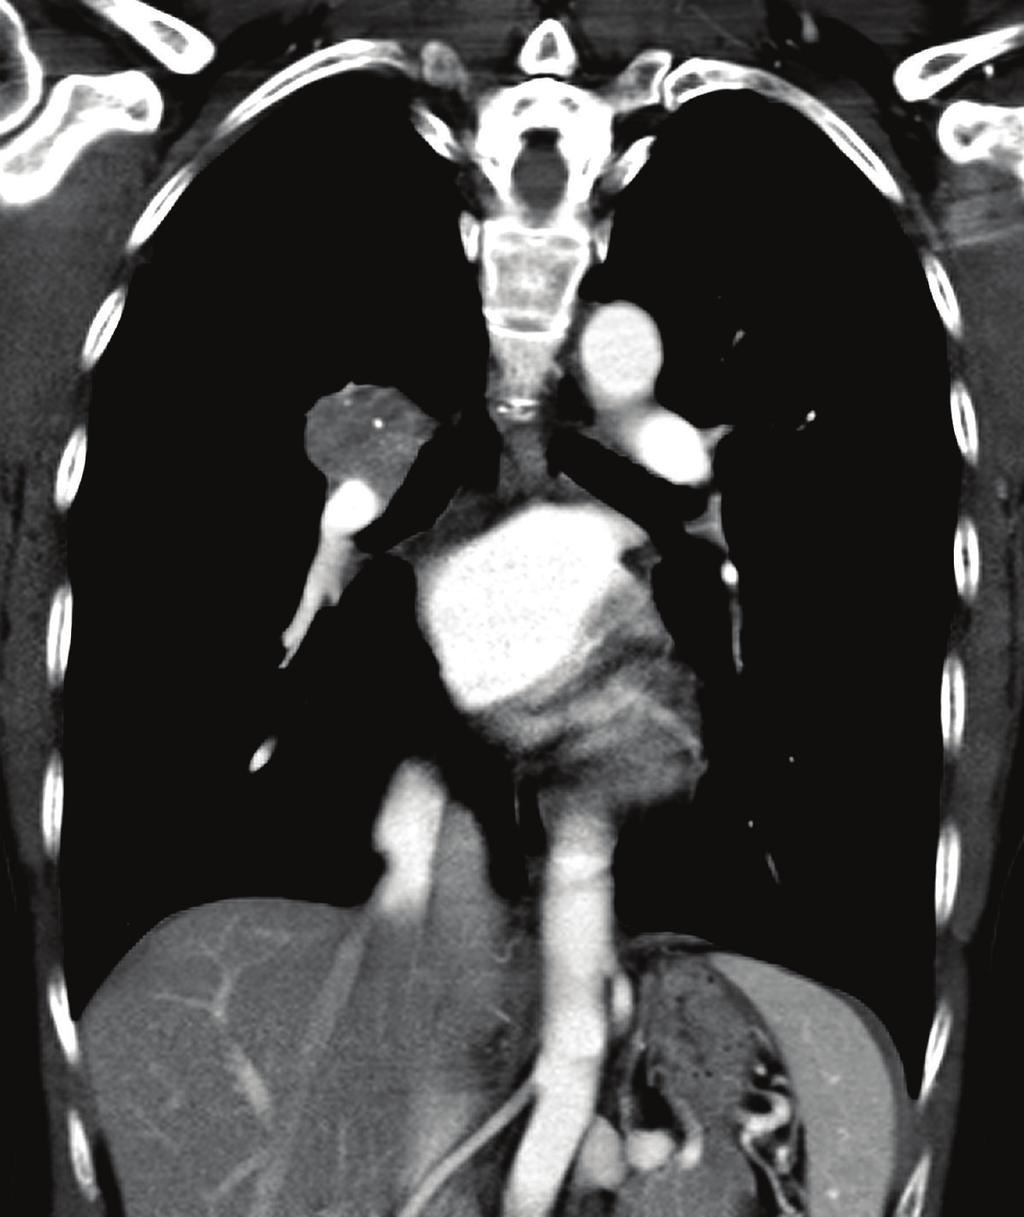 ((b) and (d)) Contrast enhanced CT scan shows a heterogeneous enhanced mass in the right pulmonary hilar region. surface cells arranged in a papillary, sclerotic, solid and hemorrhagic pattern.